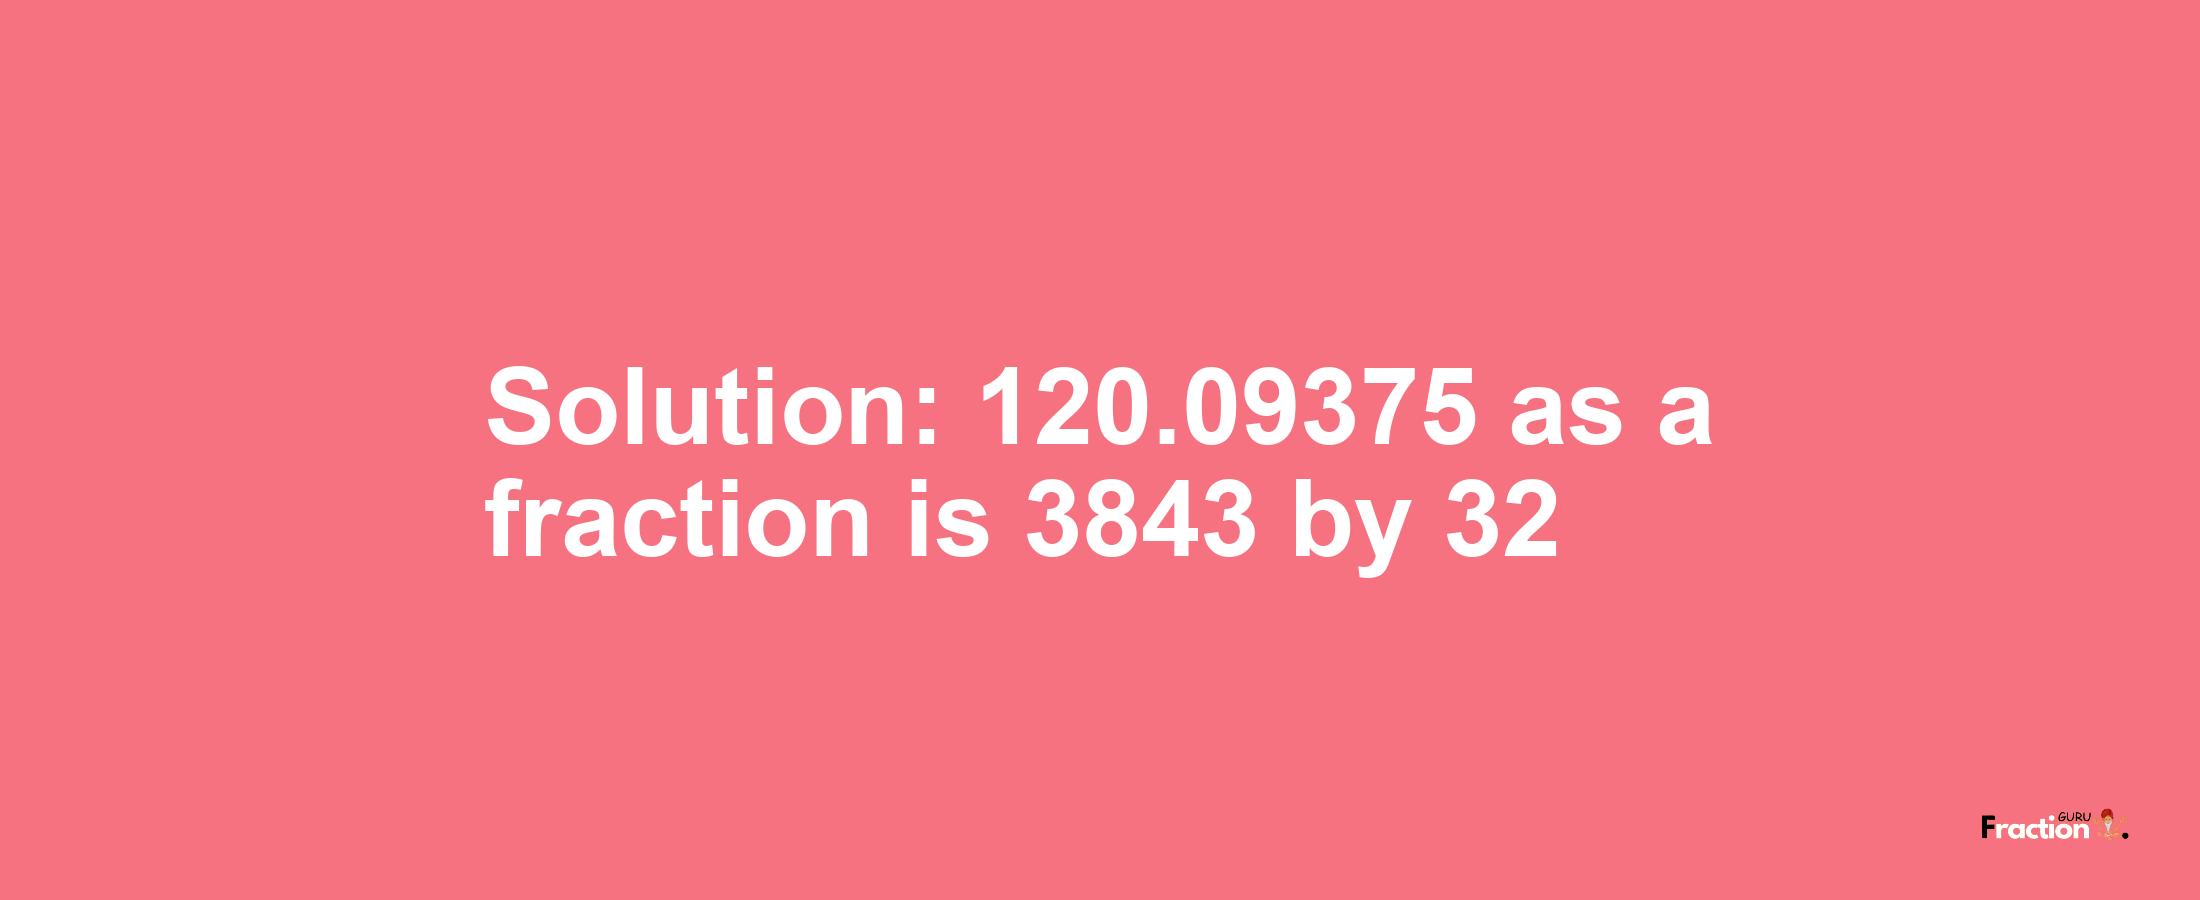 Solution:120.09375 as a fraction is 3843/32